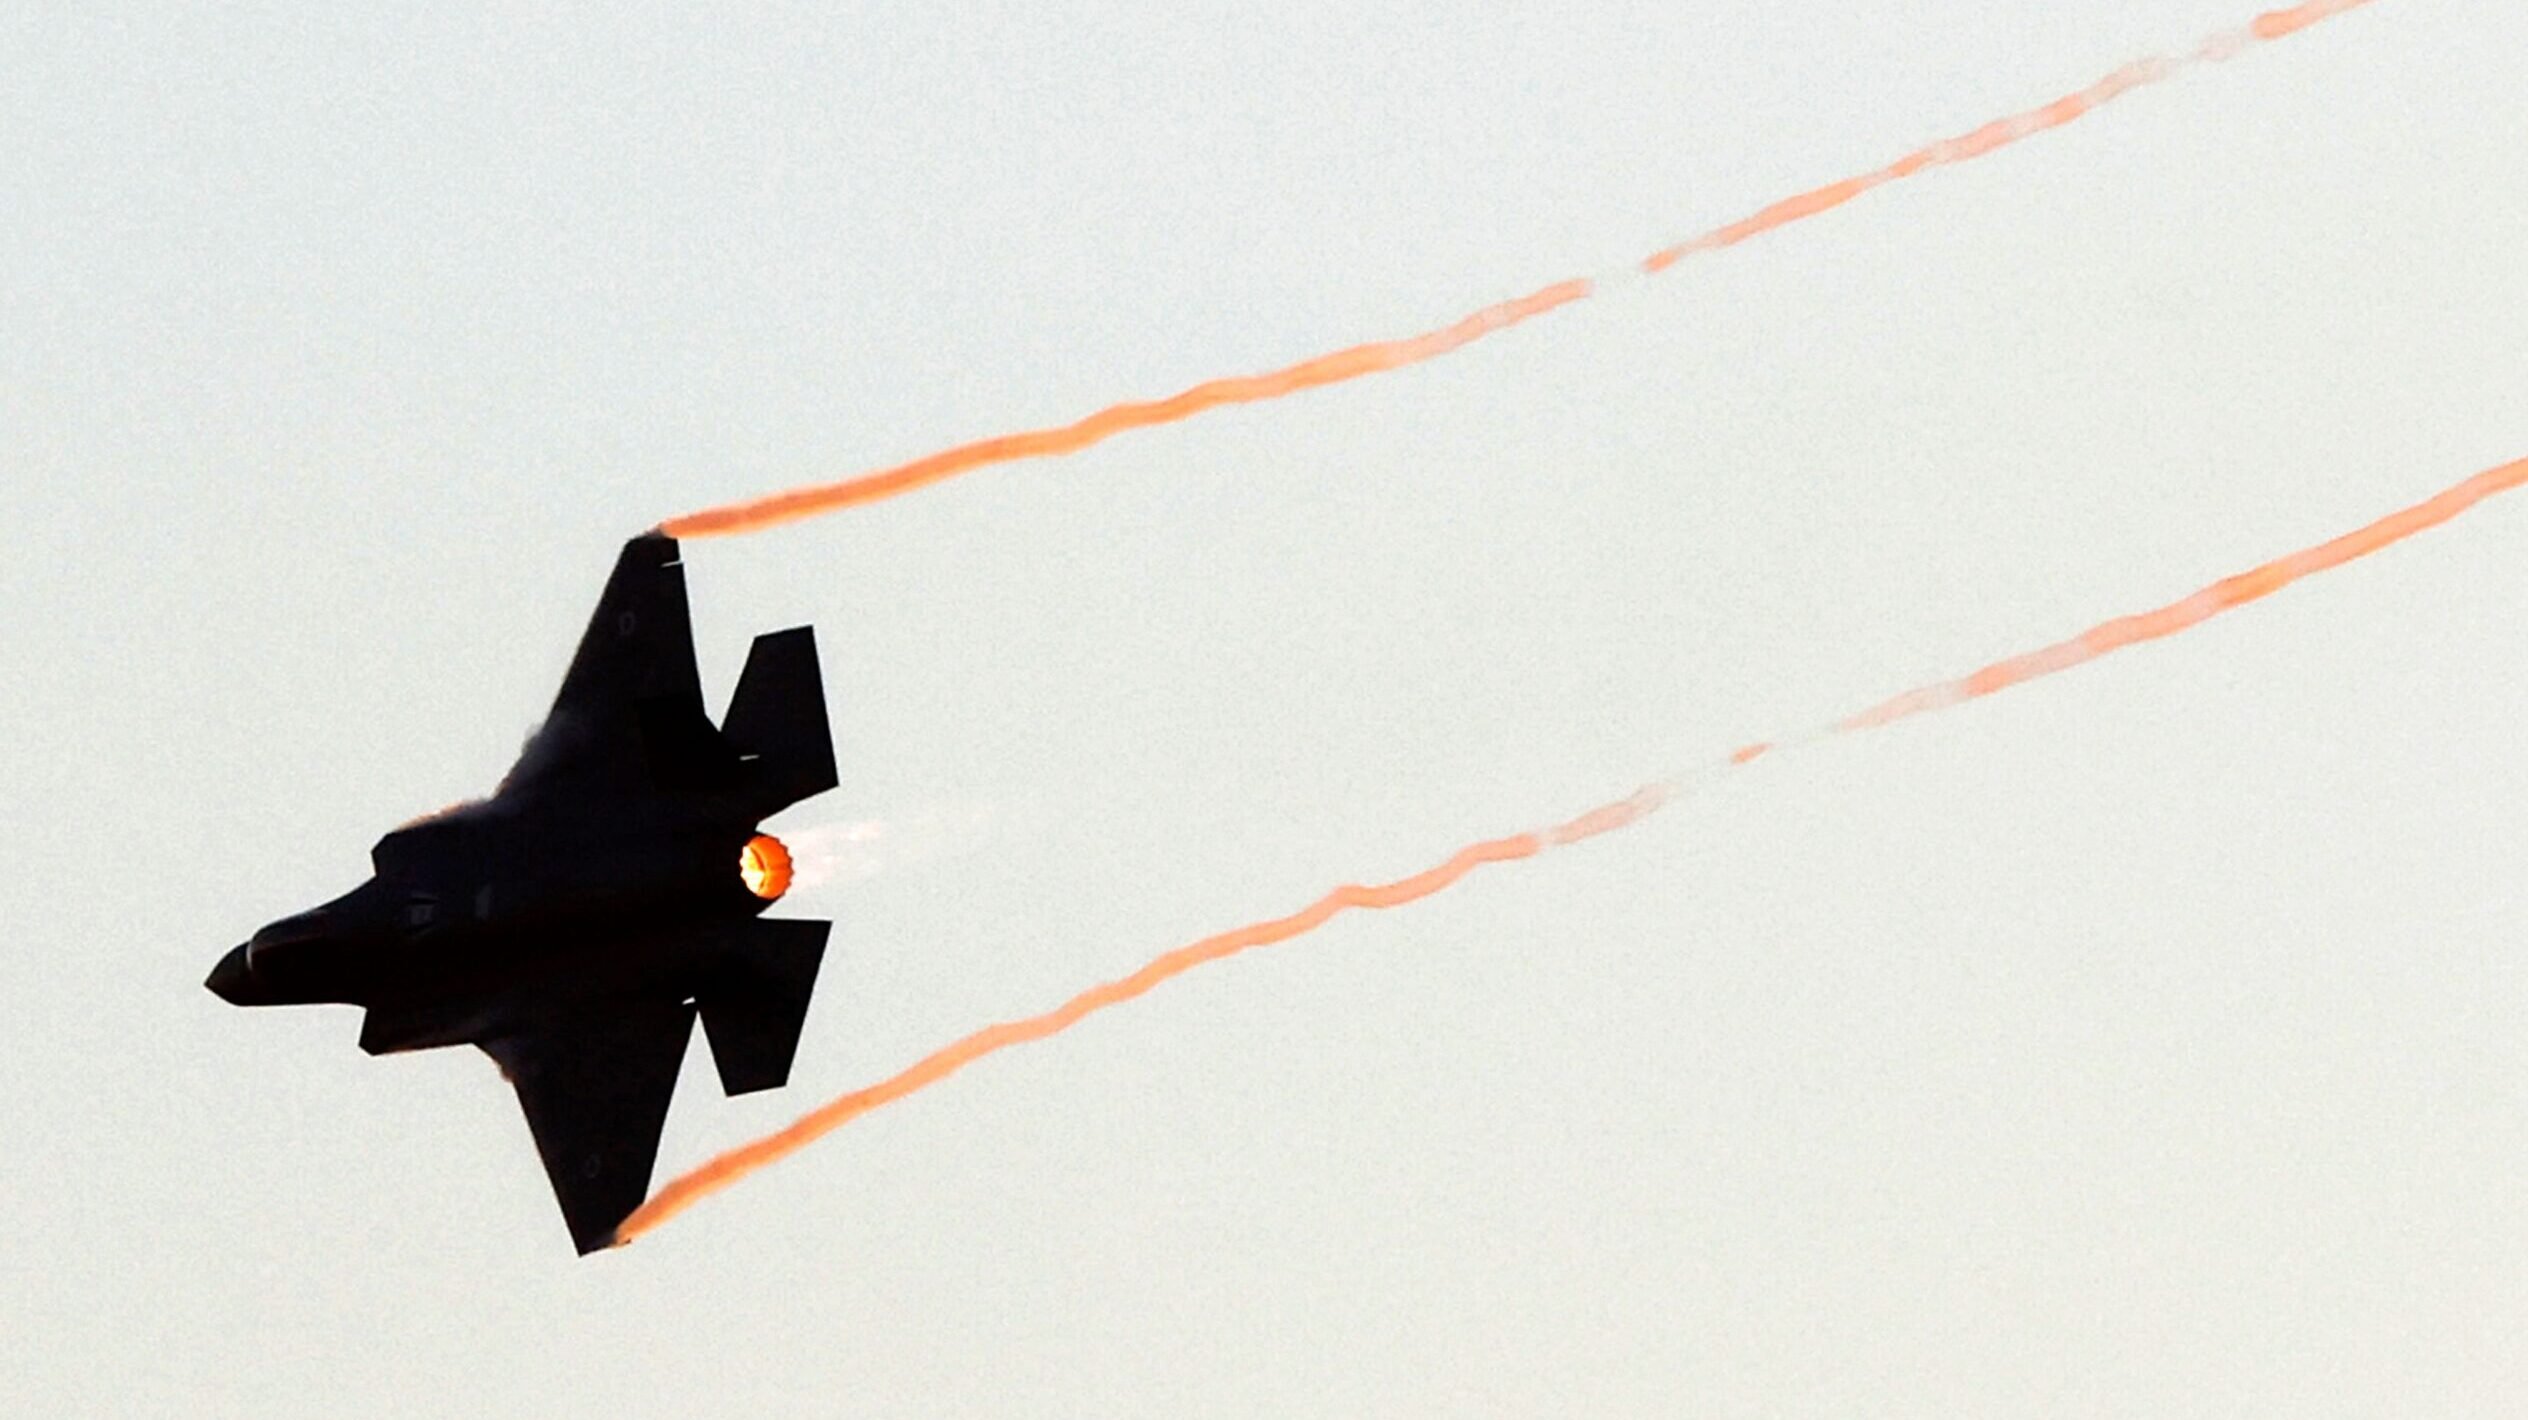 Israel uses F-35I to shoot down cruise missile, a first for Joint Strike Fighter